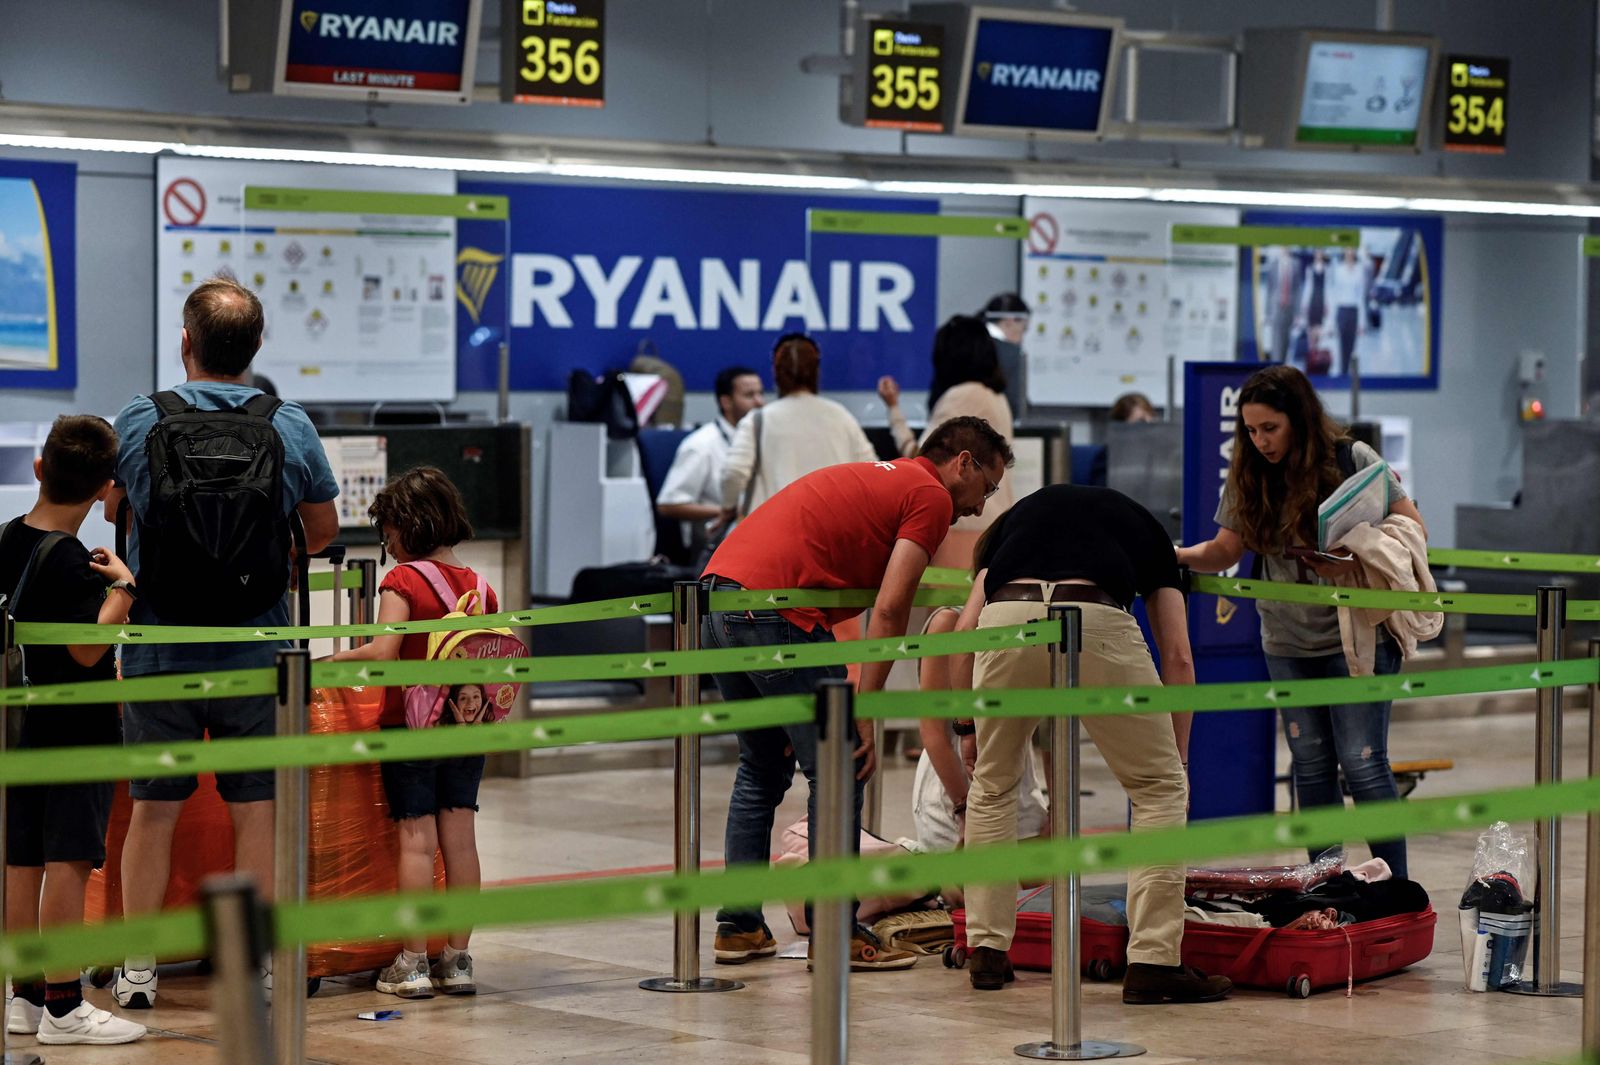 Passengers stand near the Ryanair check-in counters during a strike at Adolfo Suarez Madrid Barajas airport Madrid on June 24, 2022. - A strike by staff members at Ryanair and Brussels Airlines over pay and working conditions forced the cancelation of dozens of flights in Europe at the start of the peak summer travel season. In Spain, where Ryanair employs 1,900 people, no flights were cancelled except those heading to Belgium. (Photo by OSCAR DEL POZO / AFP) - AFP